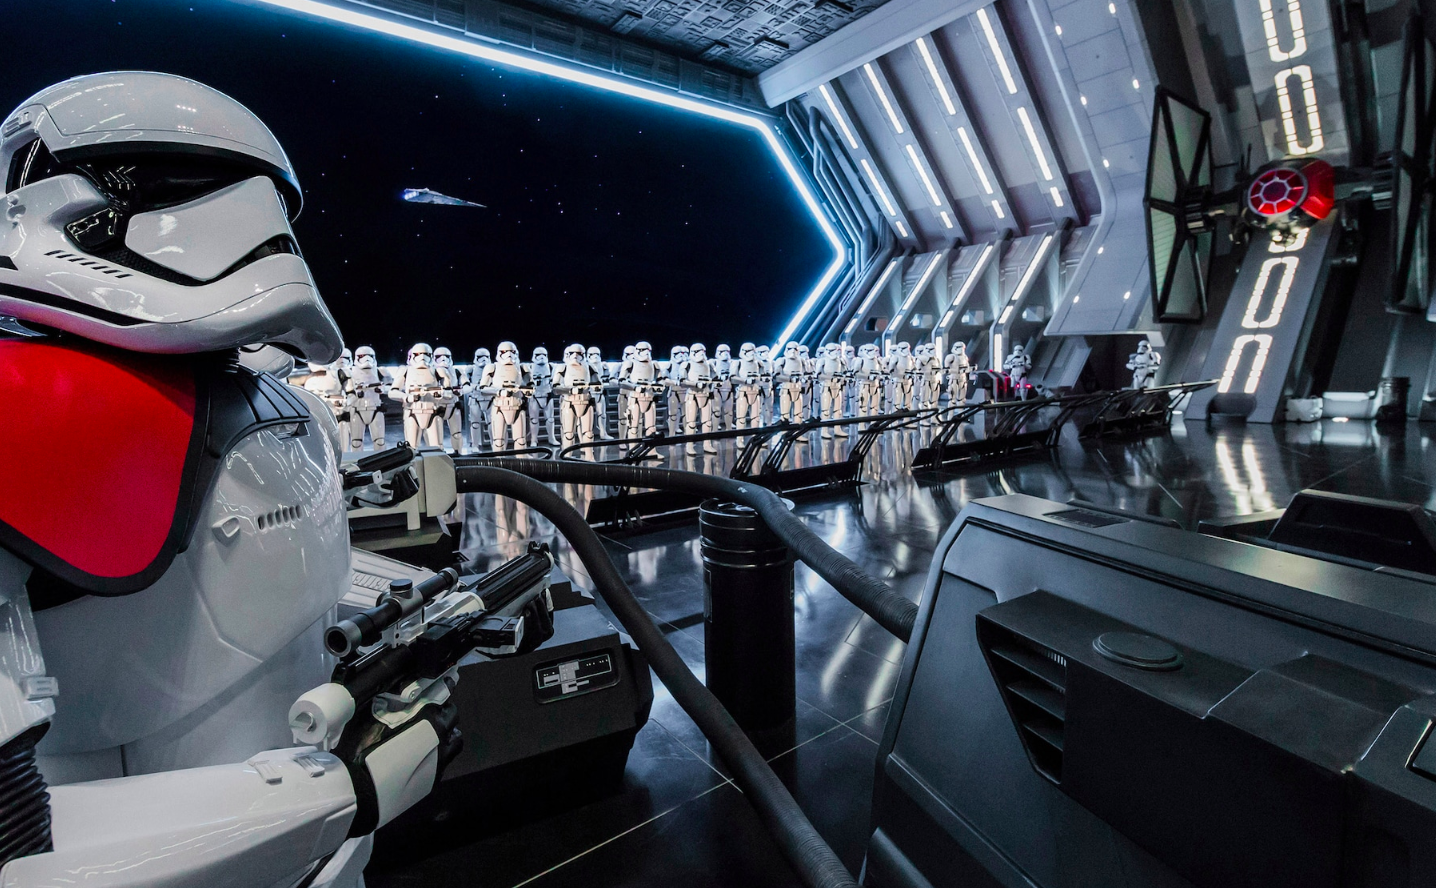 Rise of the Resistance : l’incroyable attraction Star Wars a ouvert ses portes